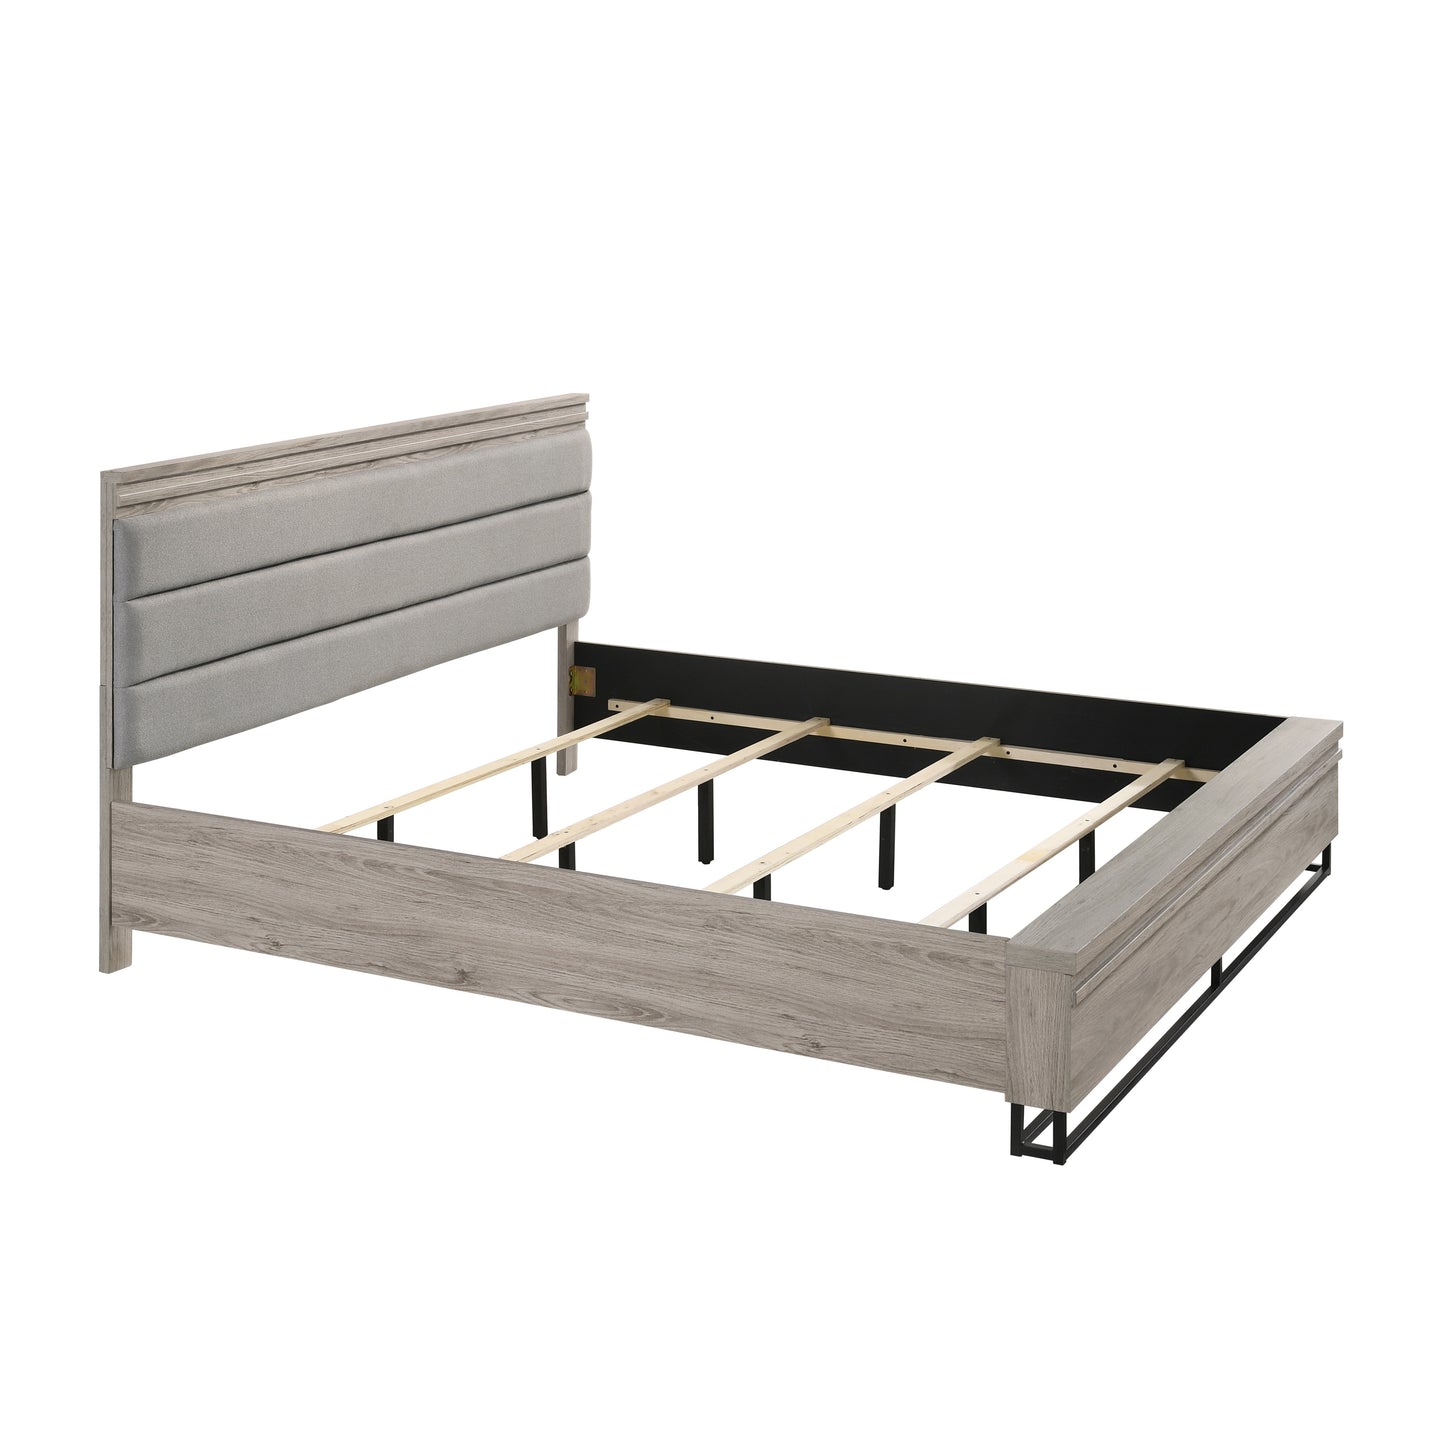 Alvear Upholstered Wood Wallbed Bed Collection with White LED Lights, Weathered Gray